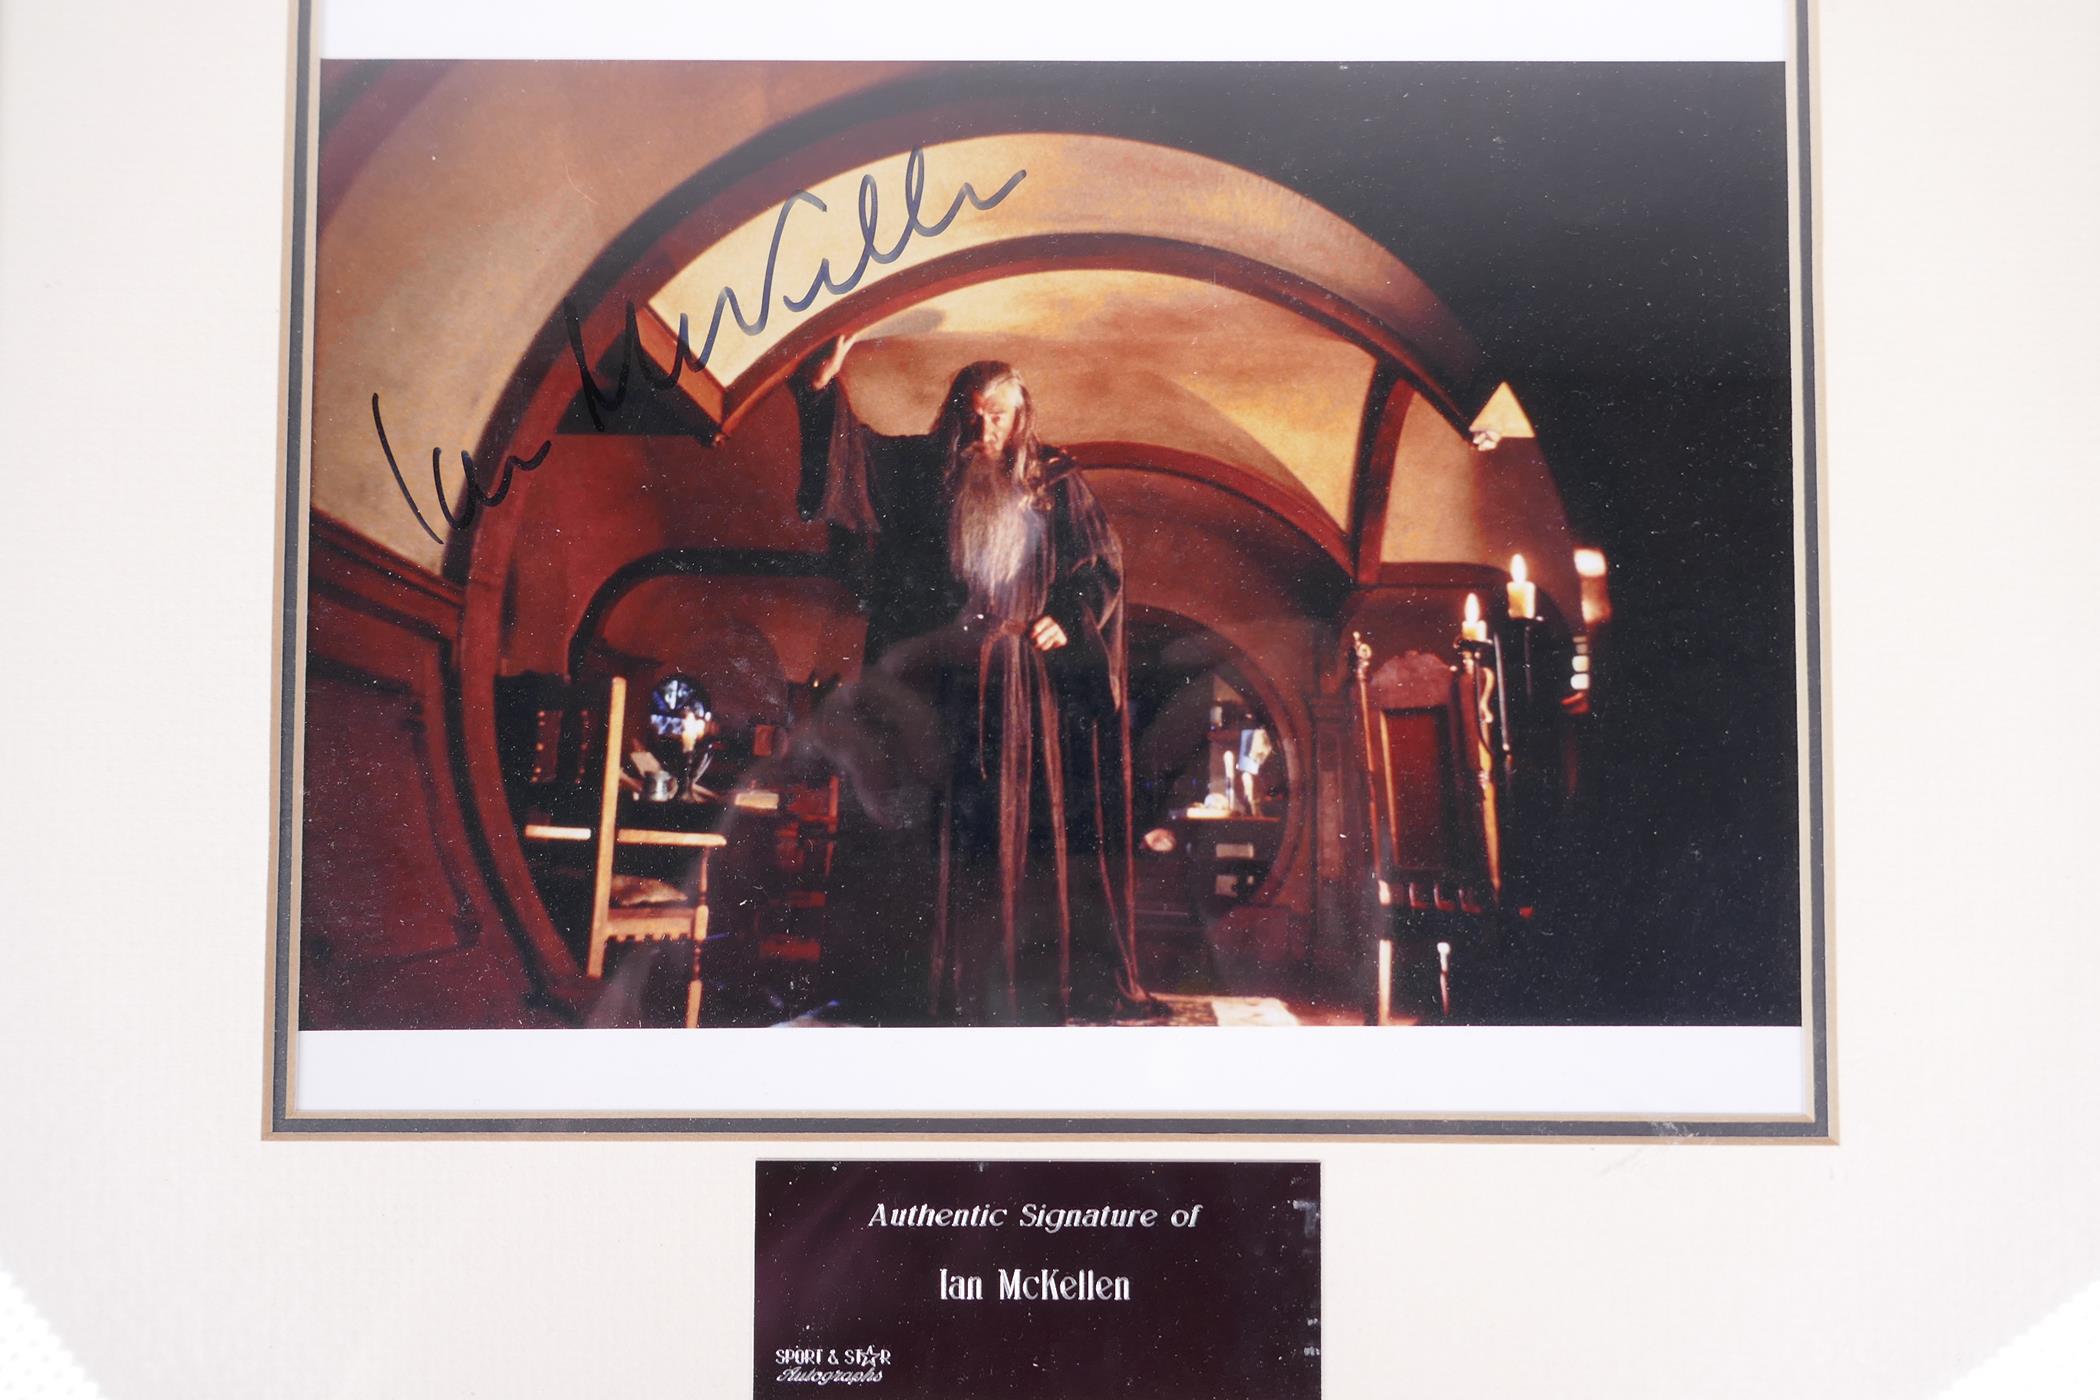 A signed photograph of Sir Ian McKellen as Gandalf in Lord of the Rings/The Hobbit, with certificate - Image 2 of 4